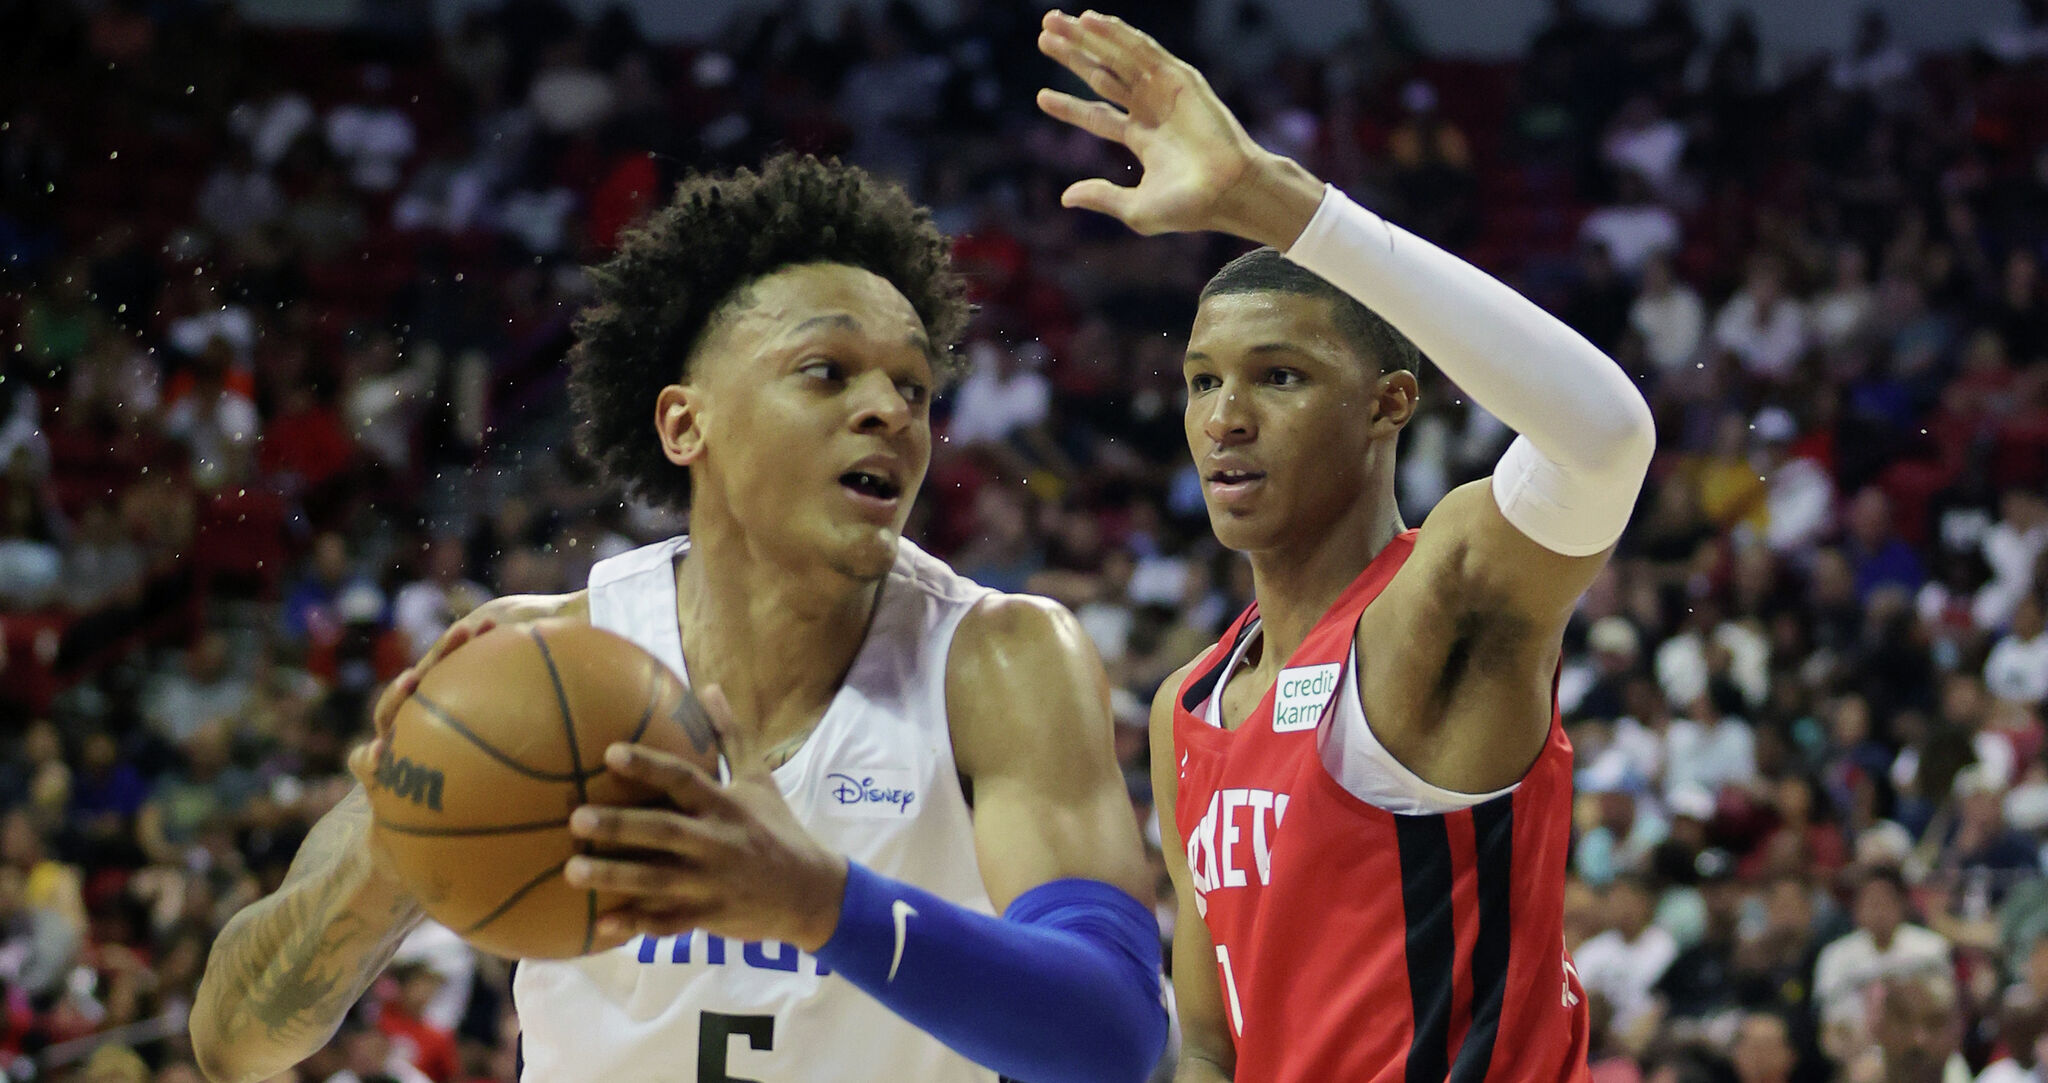 The 2022-23 Houston Rockets are going to be very young, what does